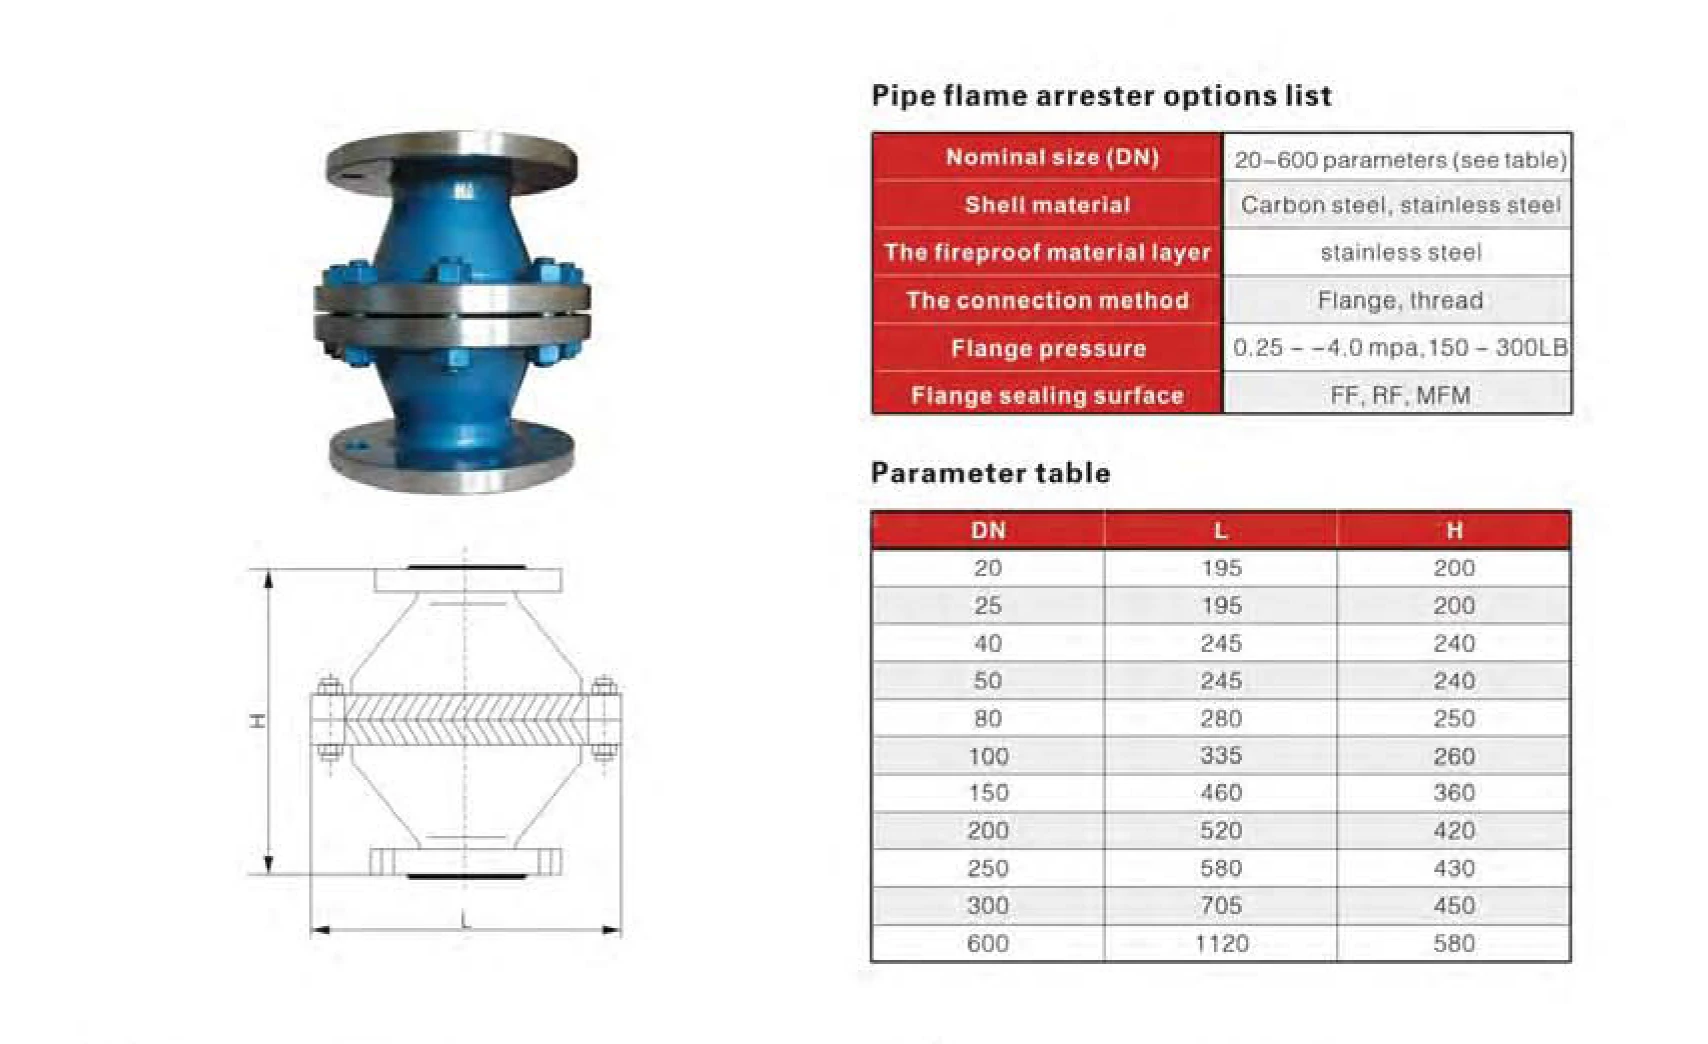 Pipe flame arrester